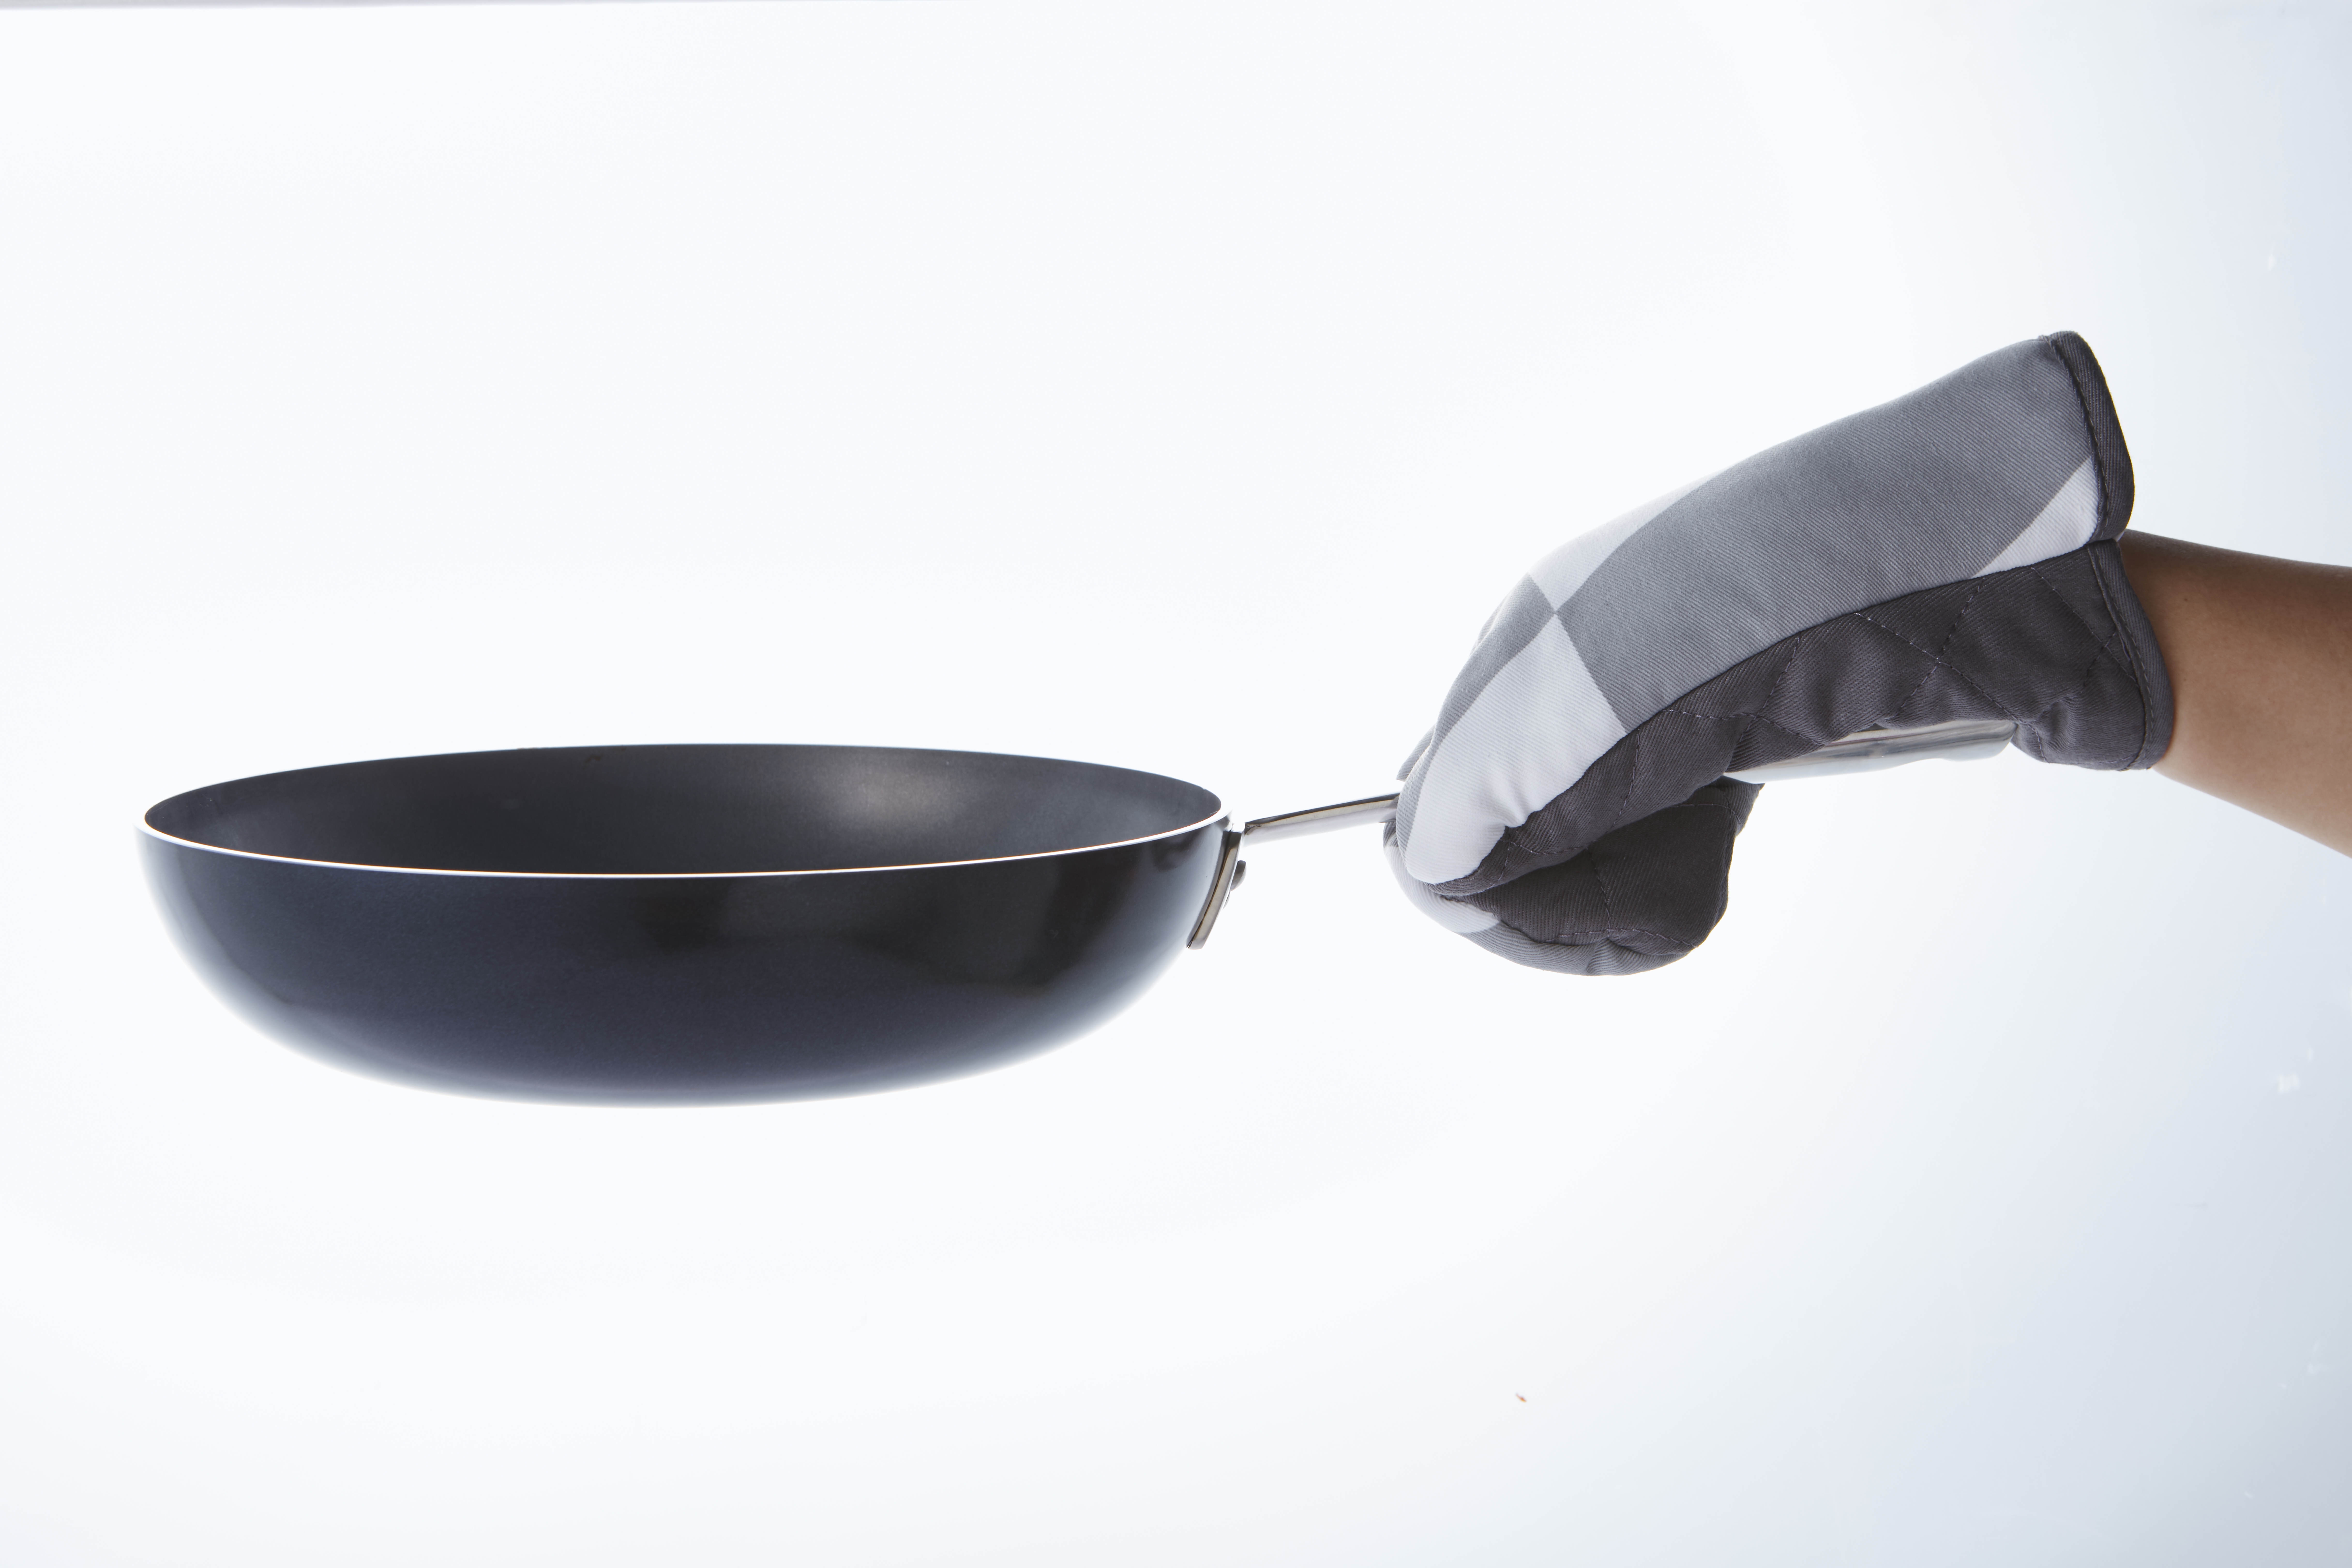 Sillkway Fry Pan 26 cm Best Nonstick Technology by Chef's Planet